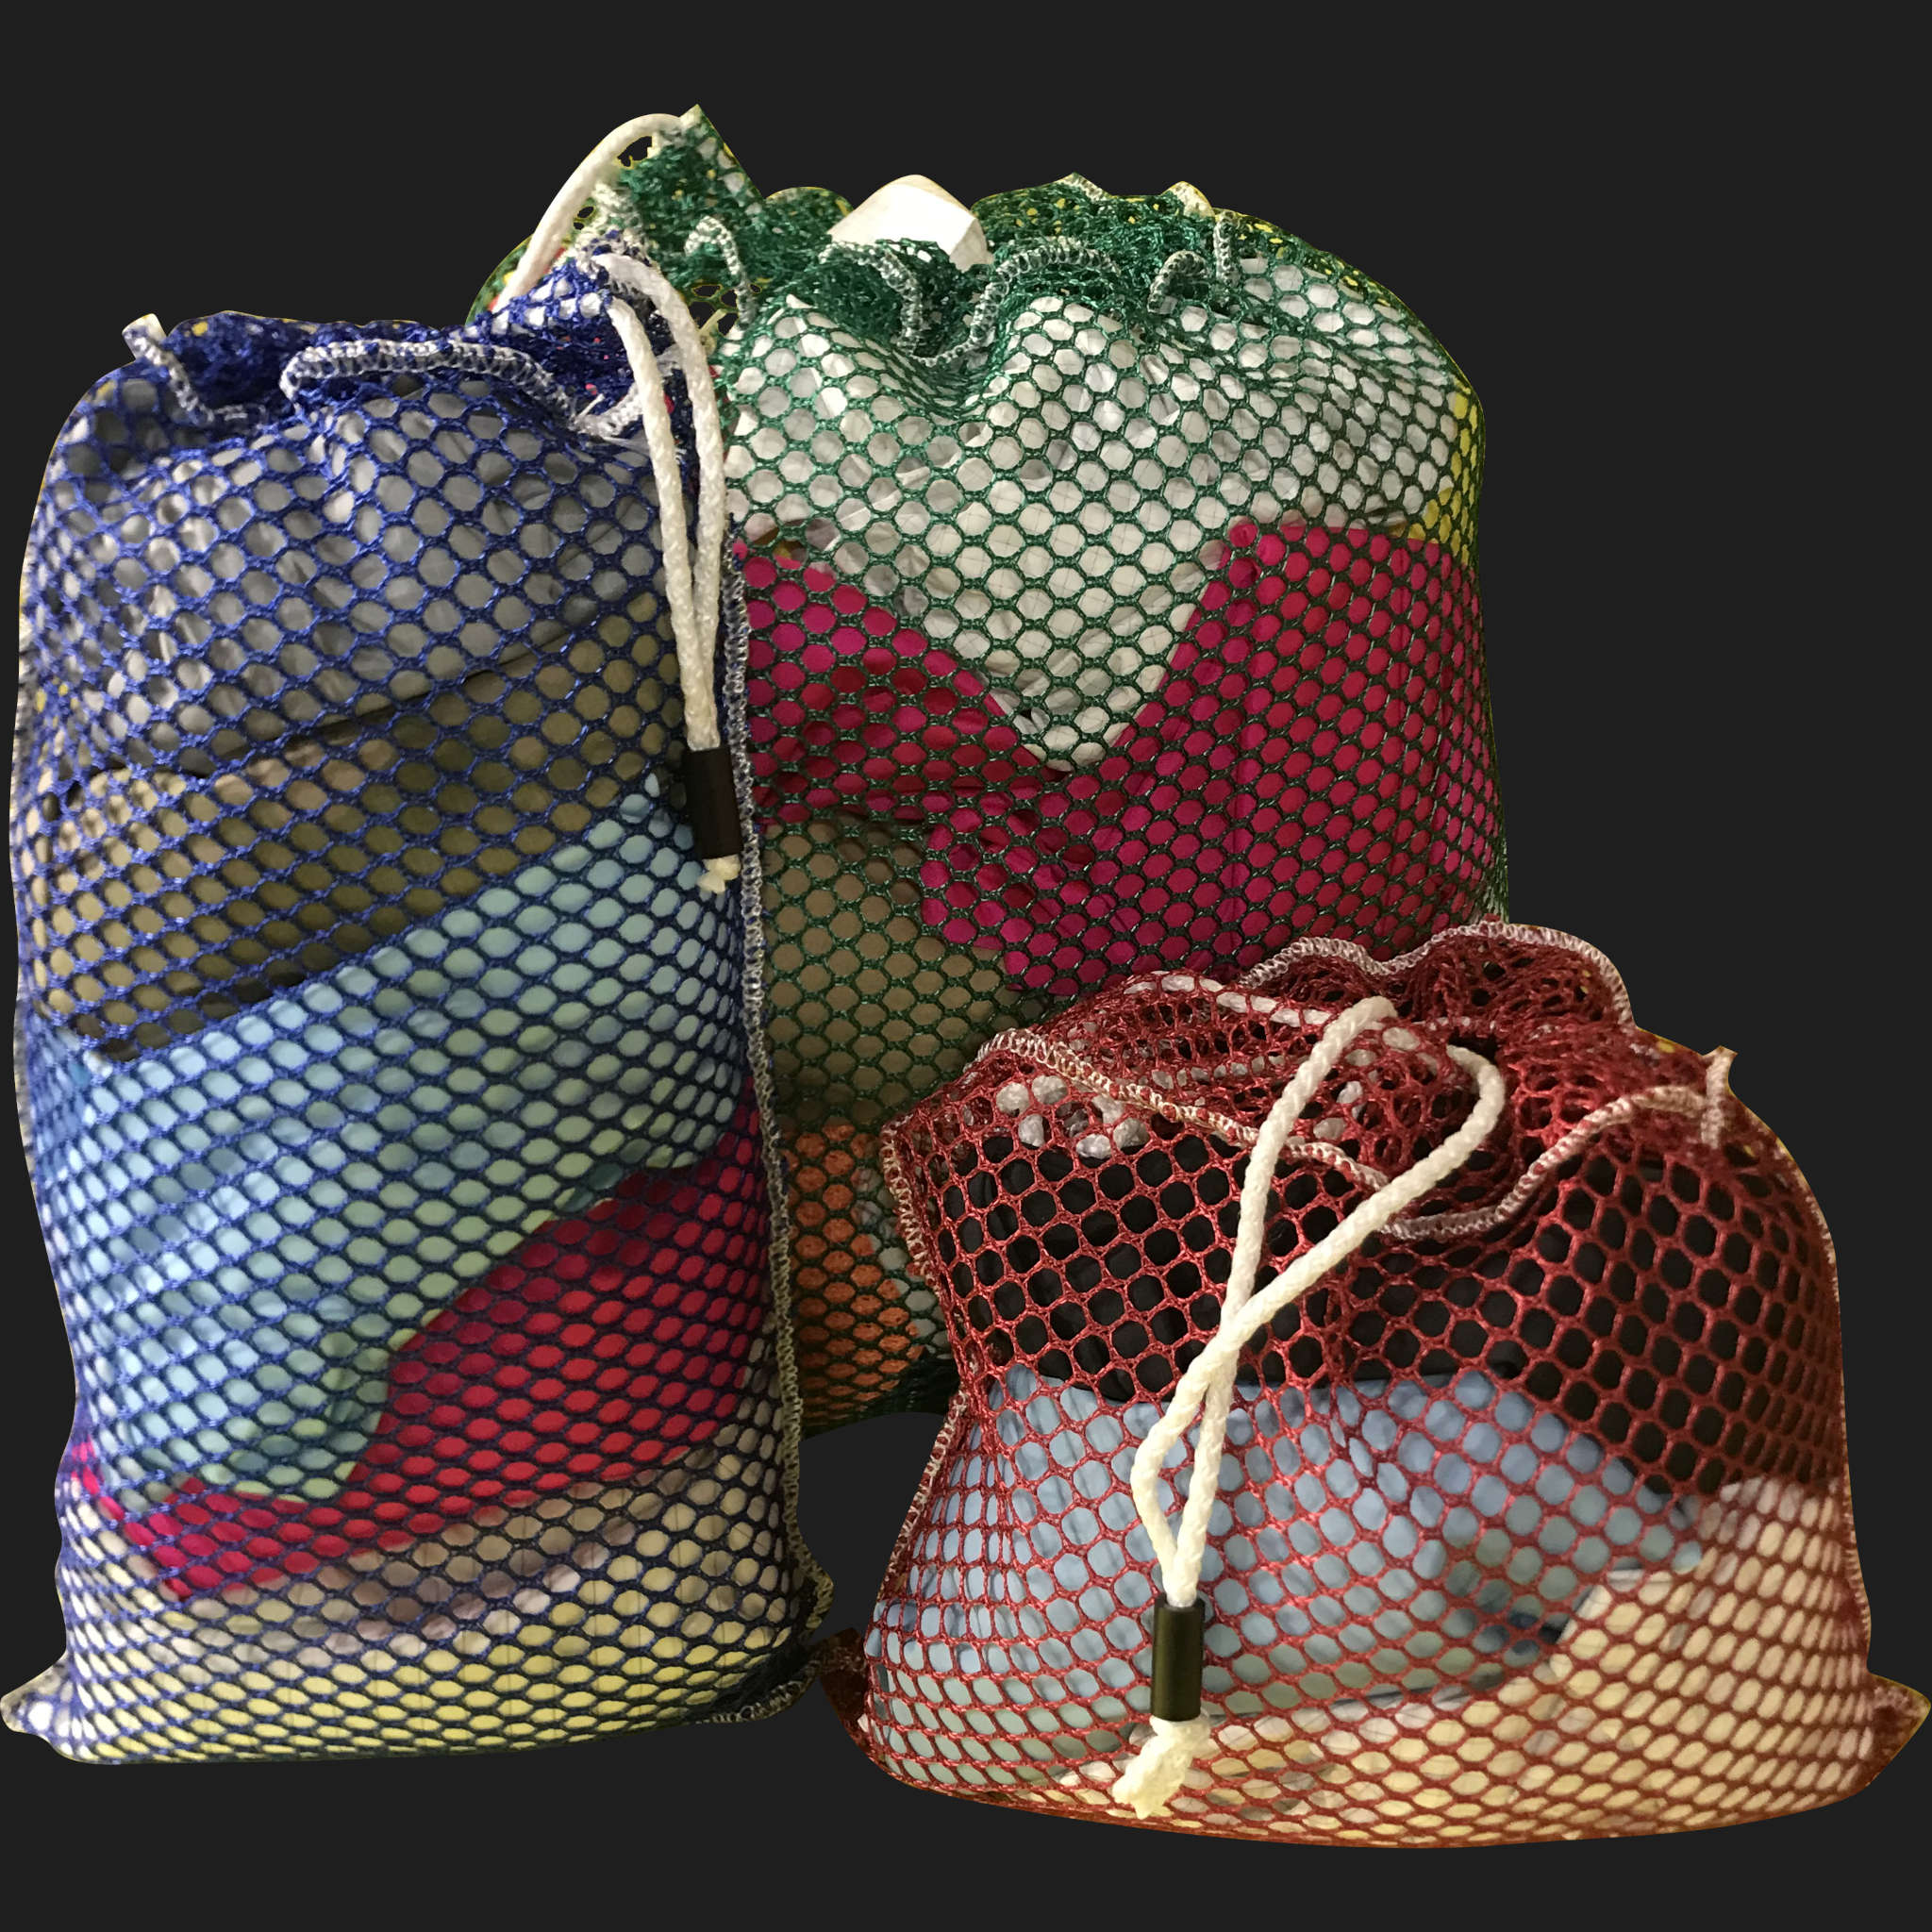 52" x 56" Customized Mesh-Net-Laundry Bags Heavy Duty with Cord and barrellock closure